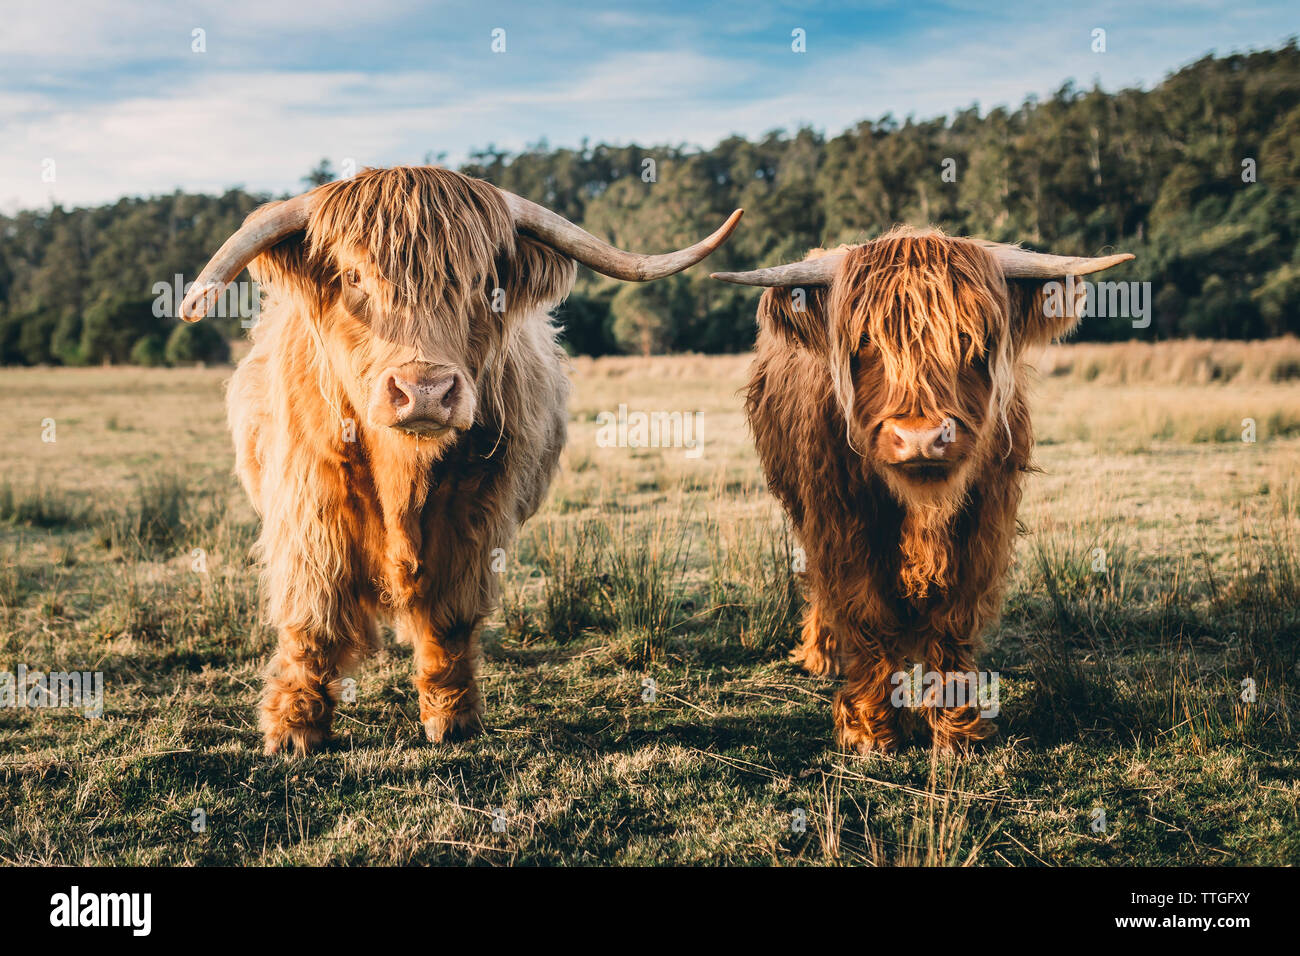 Portrait of highland cattles at grassy field against sky Stock Photo